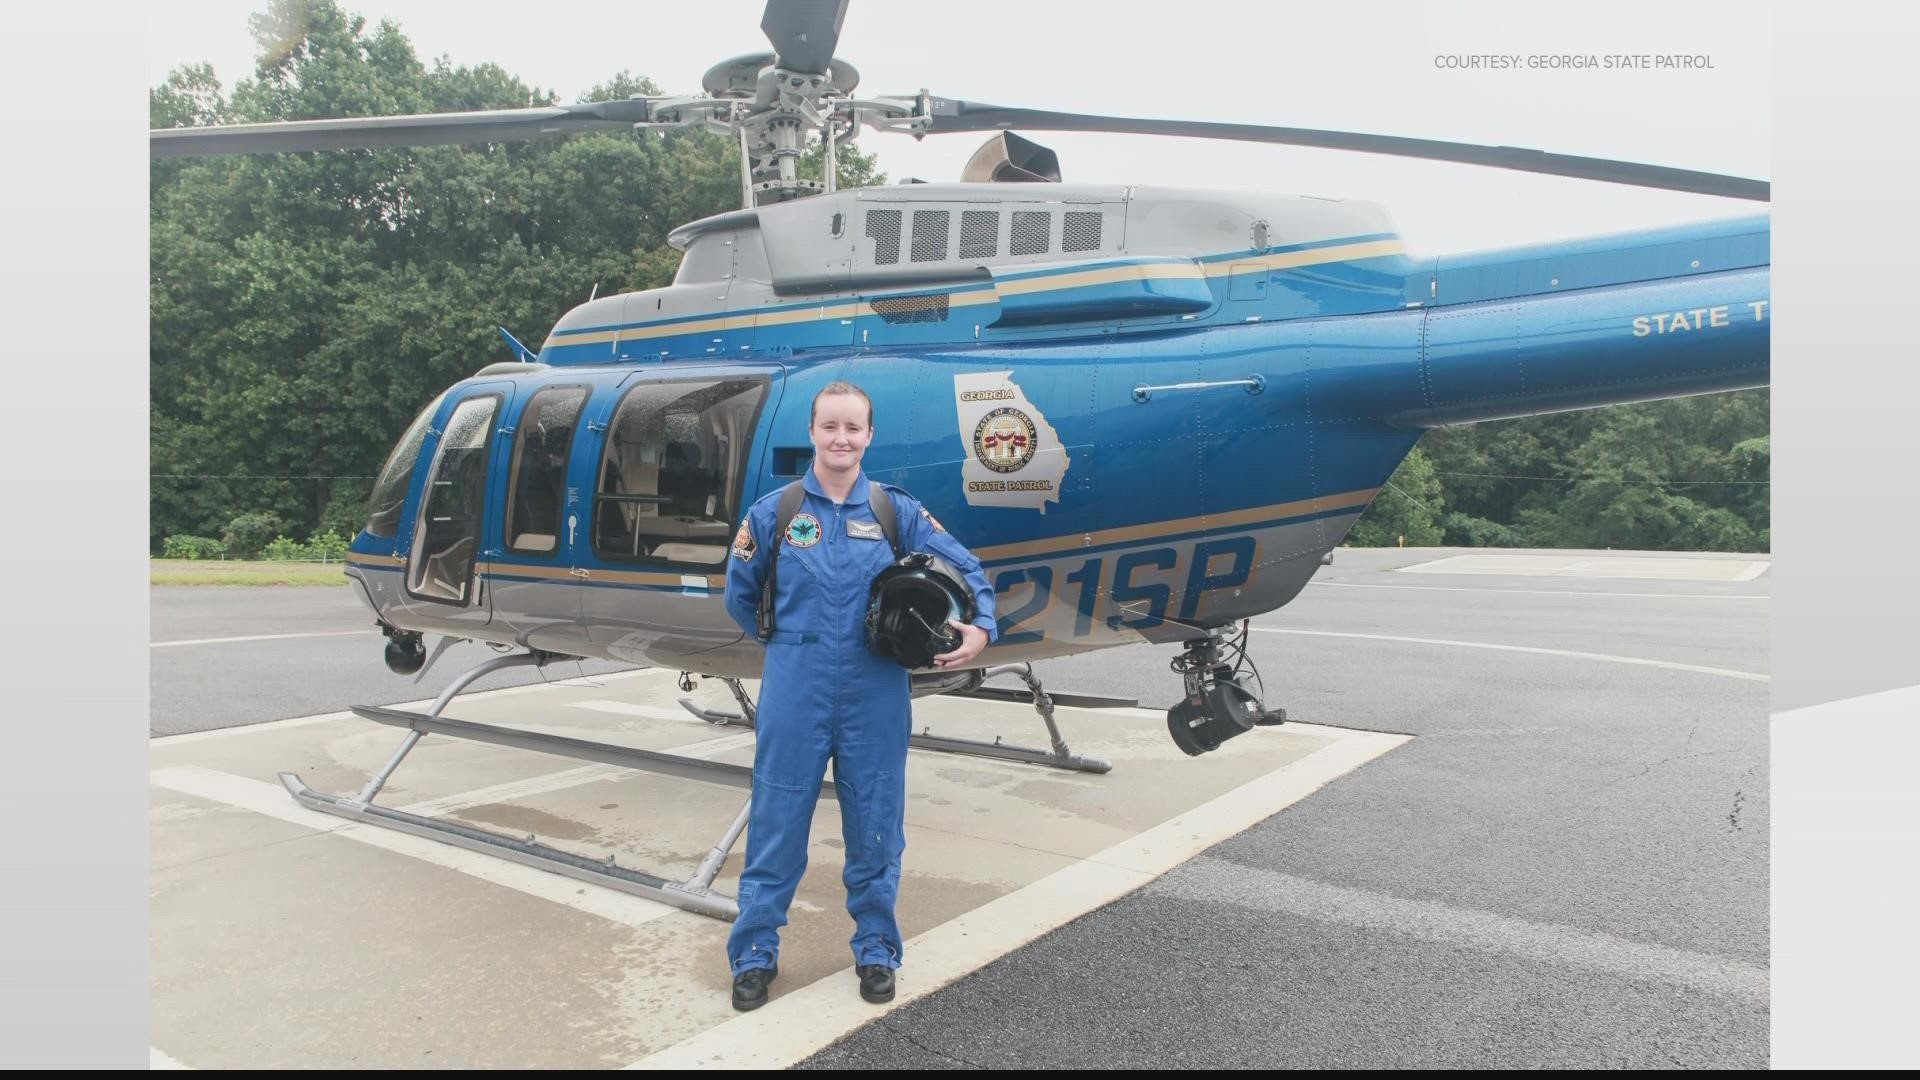 The skies of Georgia will now be graced by the first female pilot in the history of the Georgia State Patrol Aviation Division.